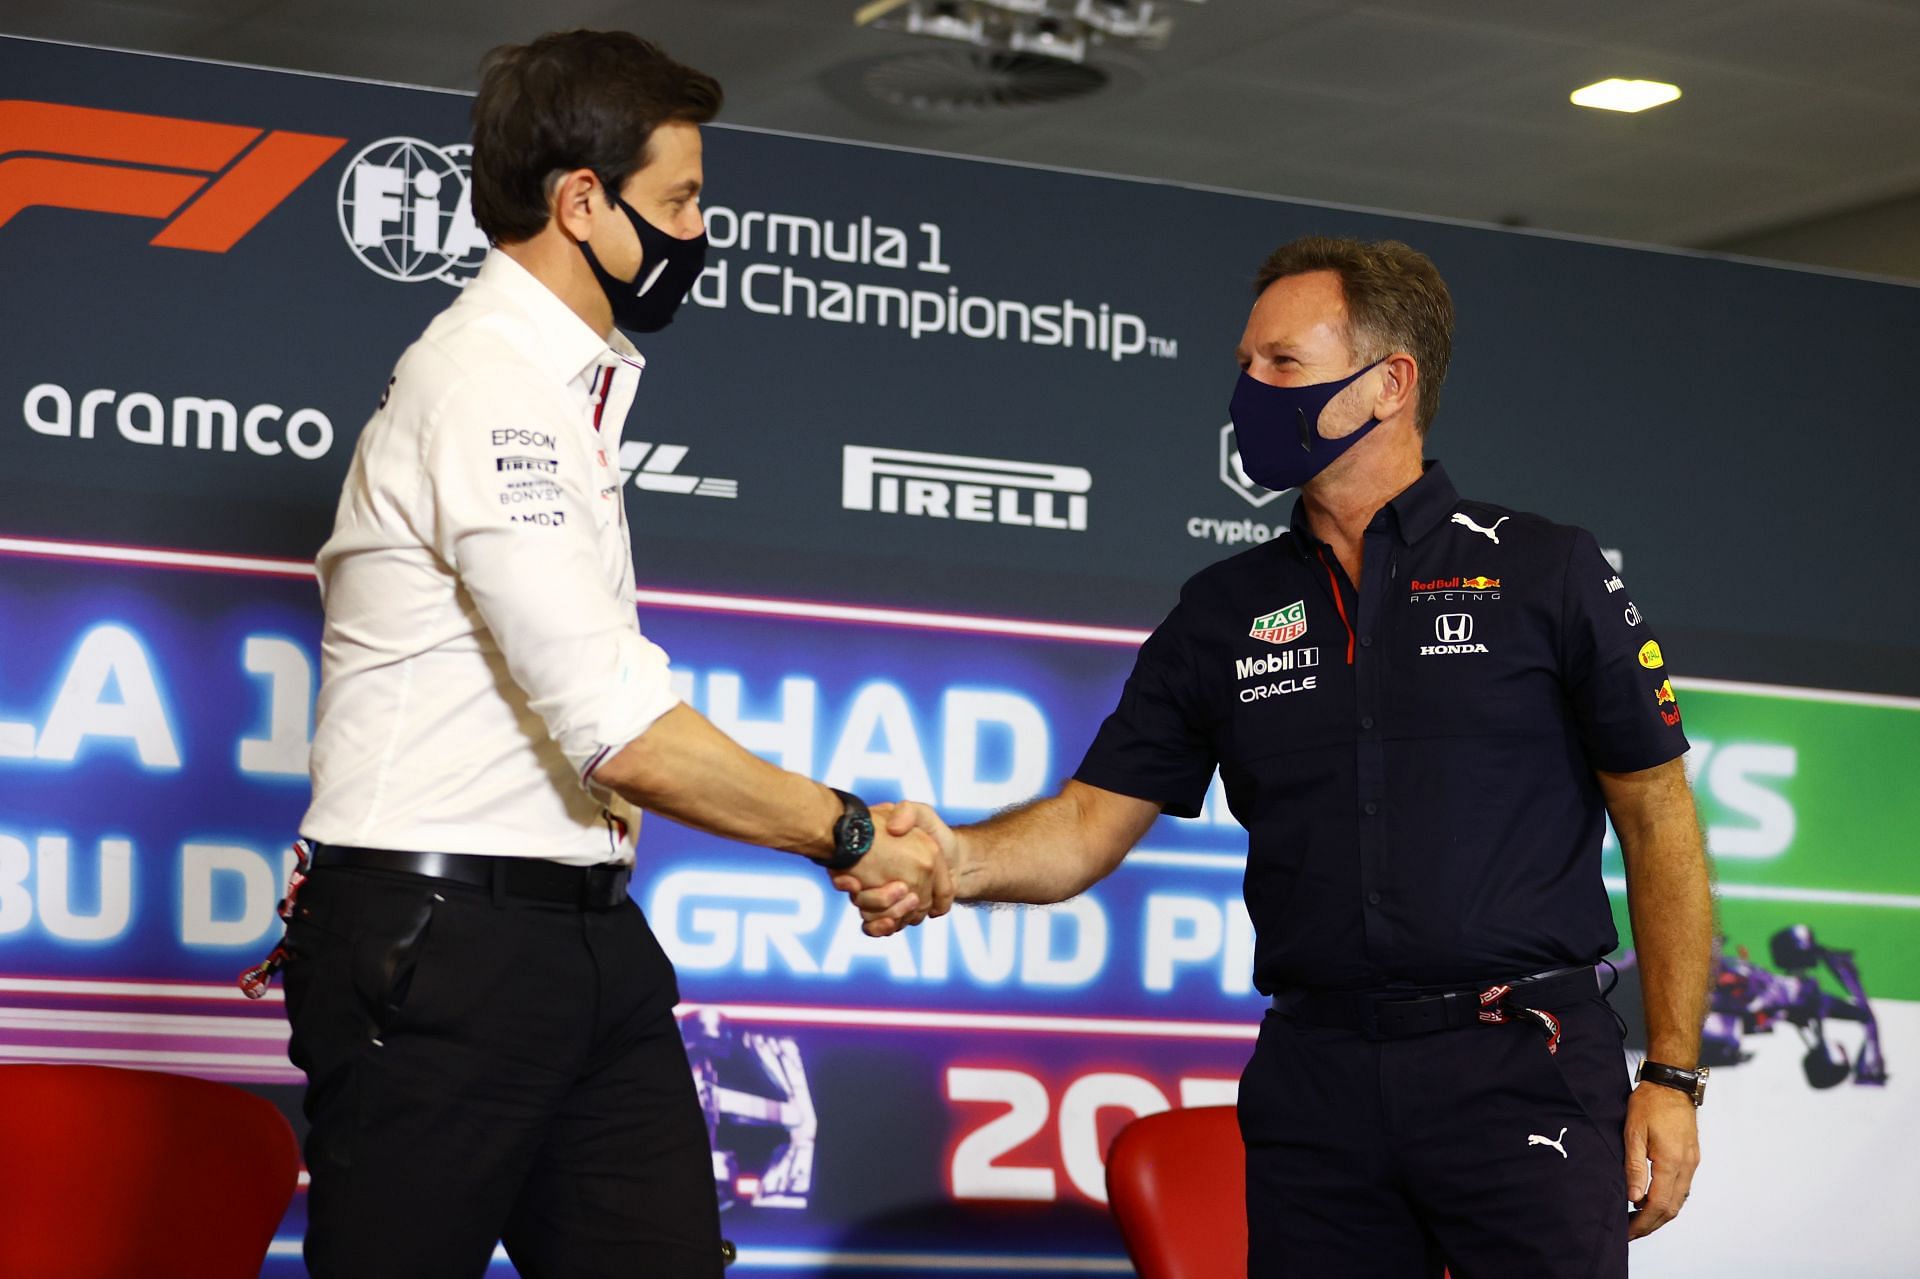 Christian Horner (right) and Toto Wolff share a friendly handshake ahead of the 2021 Qatar Grand Prix